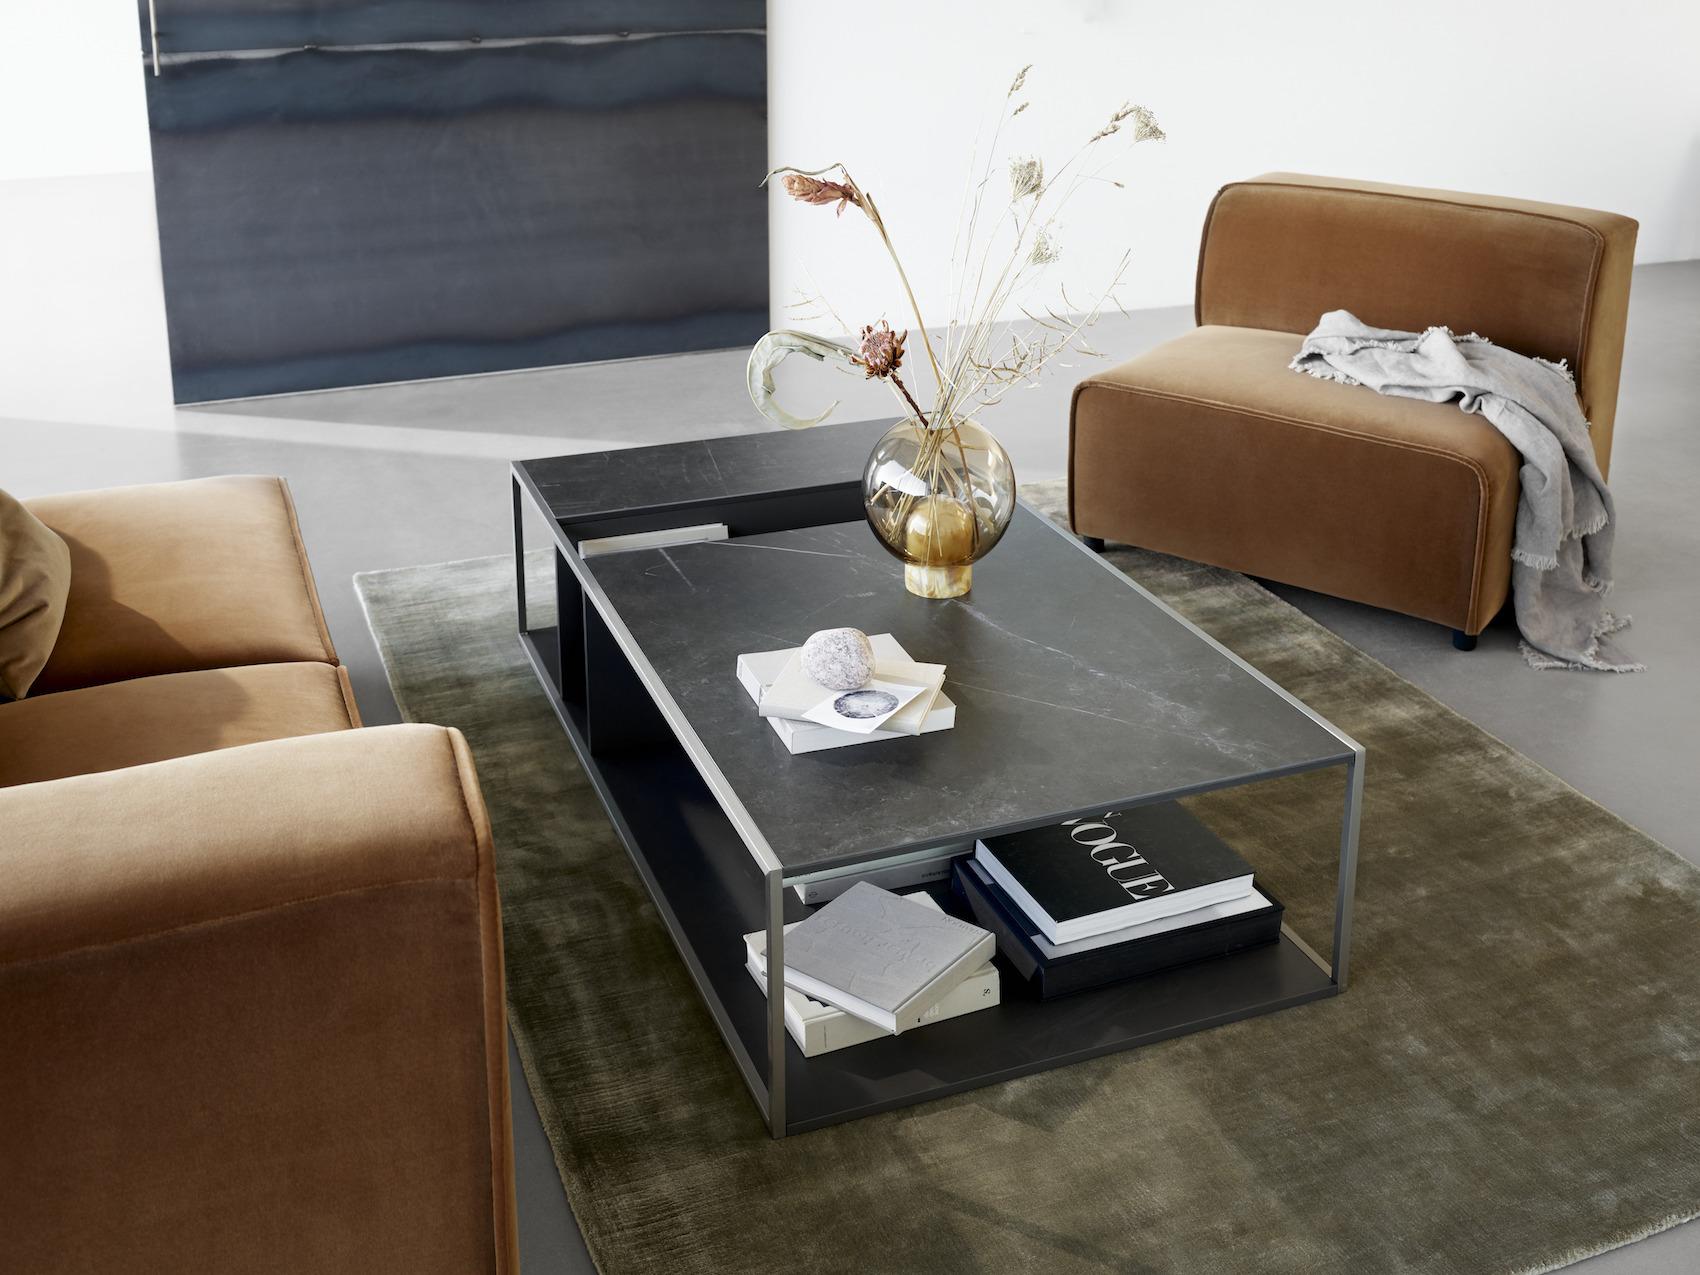 Editors’ Picks: 4 Must-Have Coffee Tables For Your Home